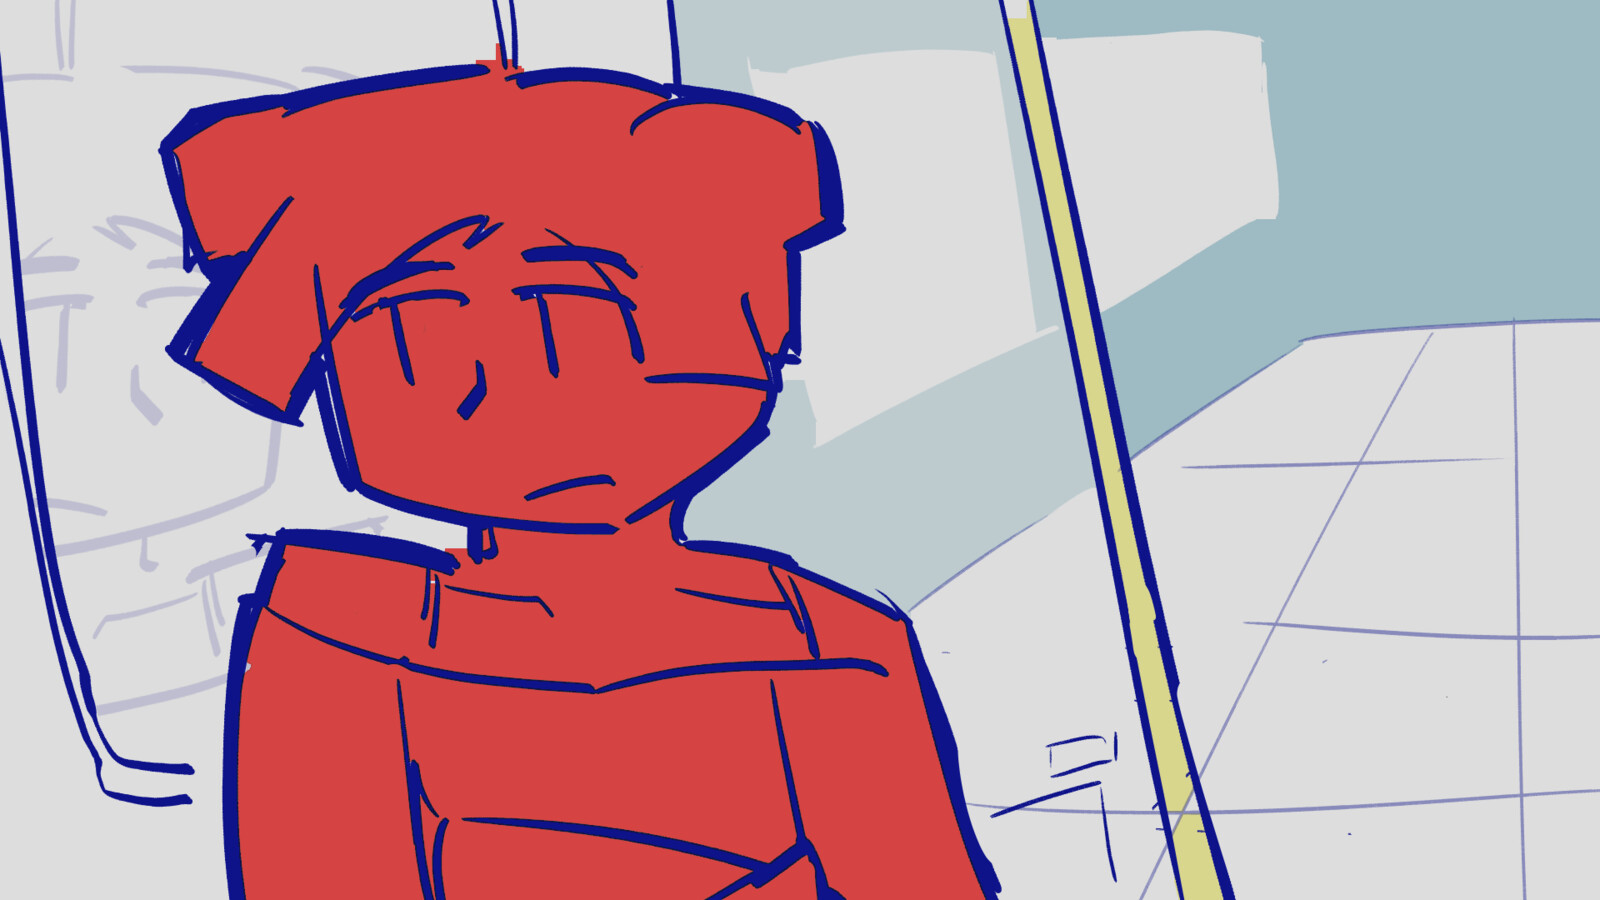 coloured storyboard